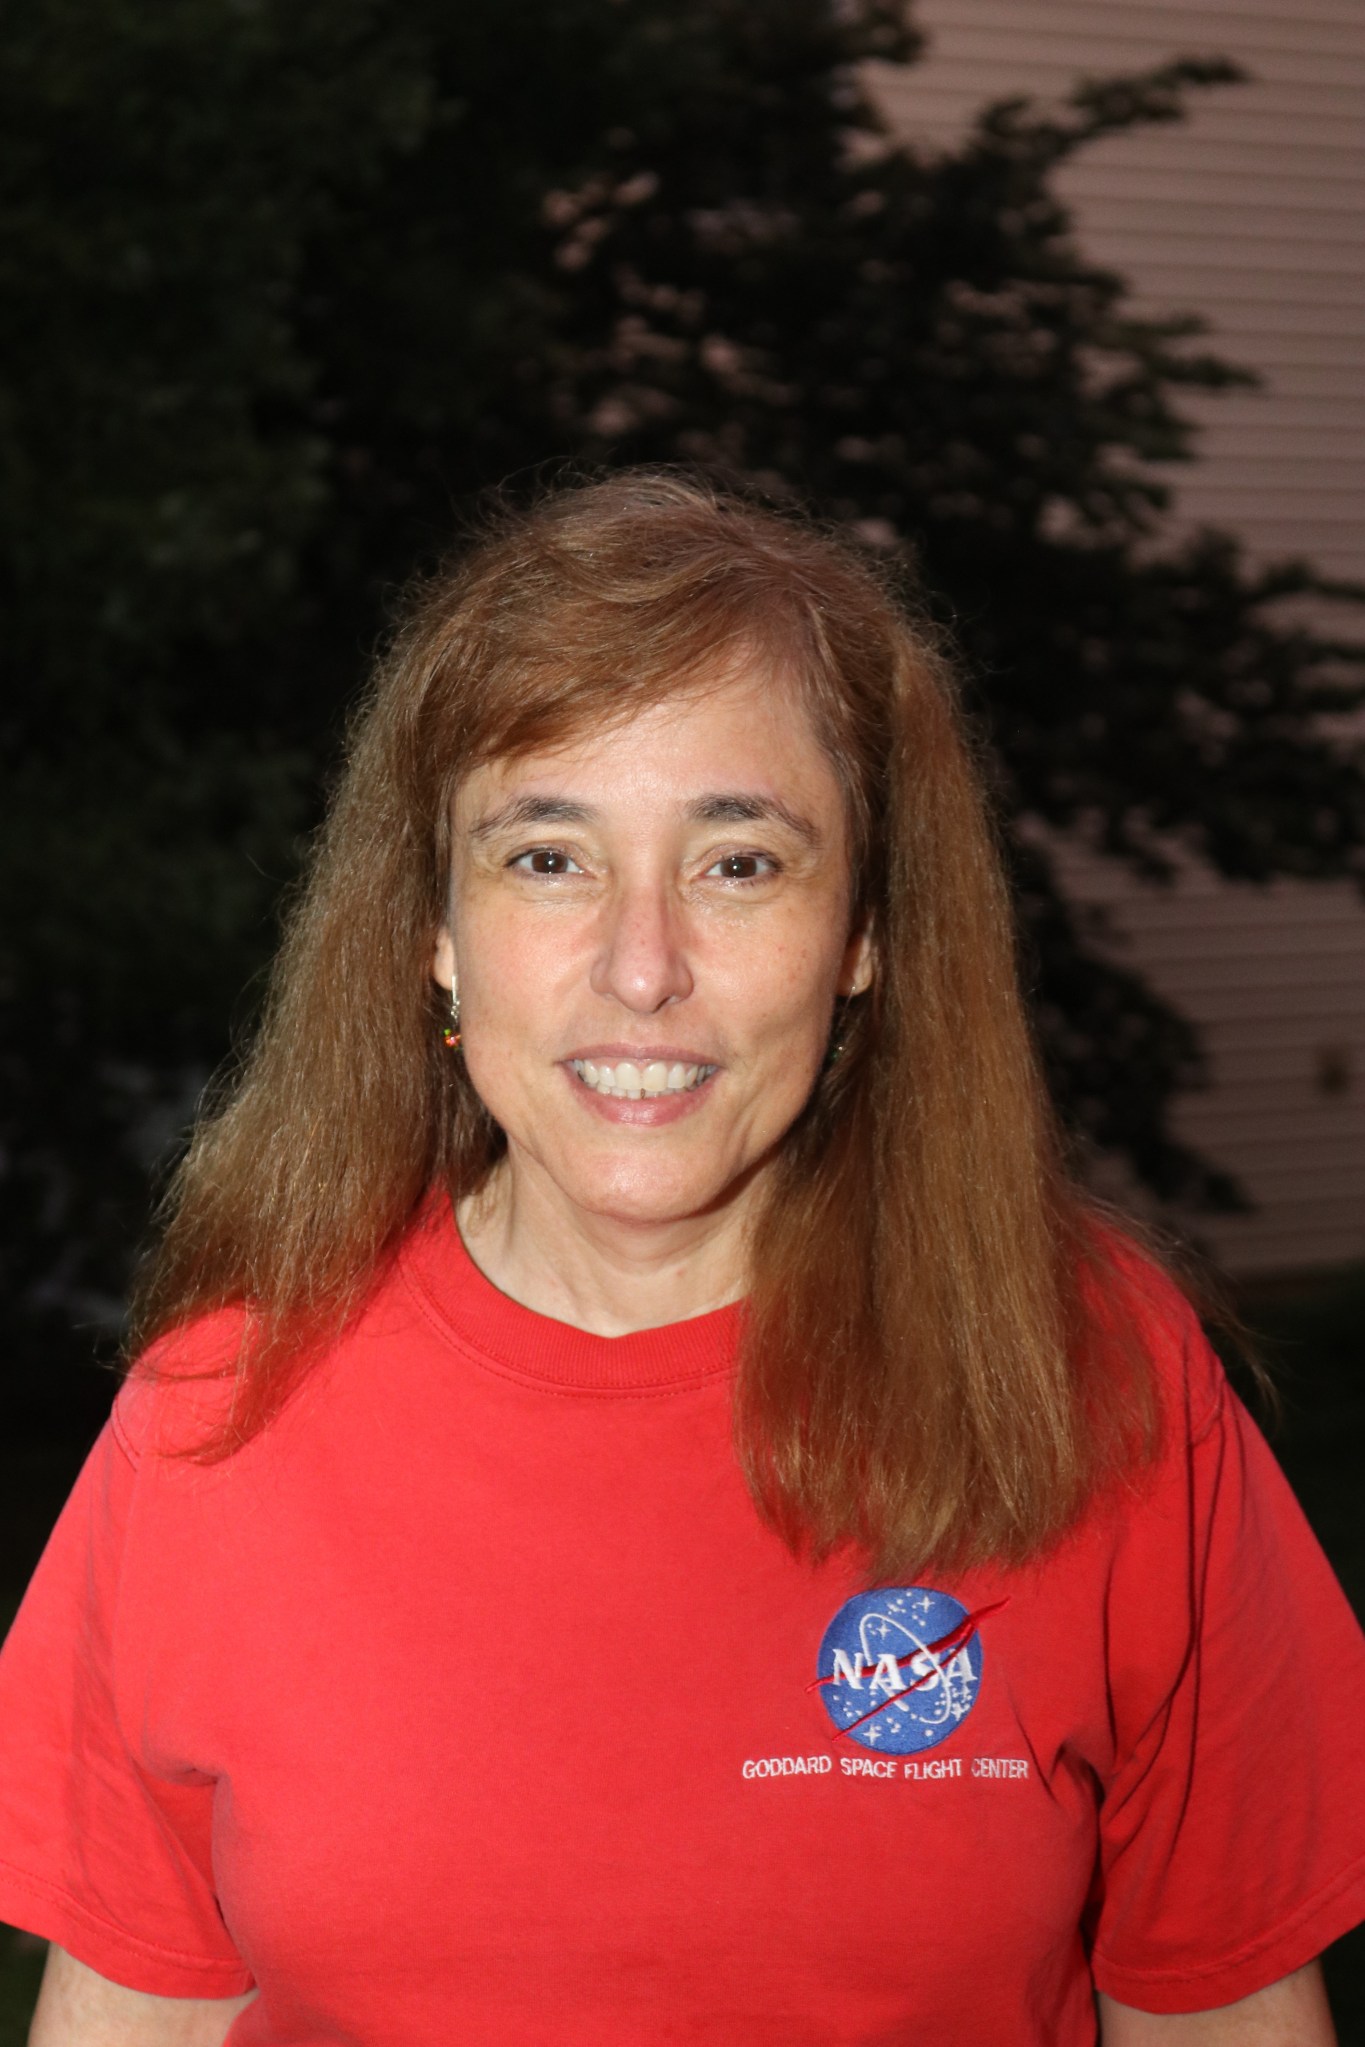 Woman with reddish brown shoulder length hair smiles wearing a red shirt with a NASA logo that says "Goddard Space Flight Center" 